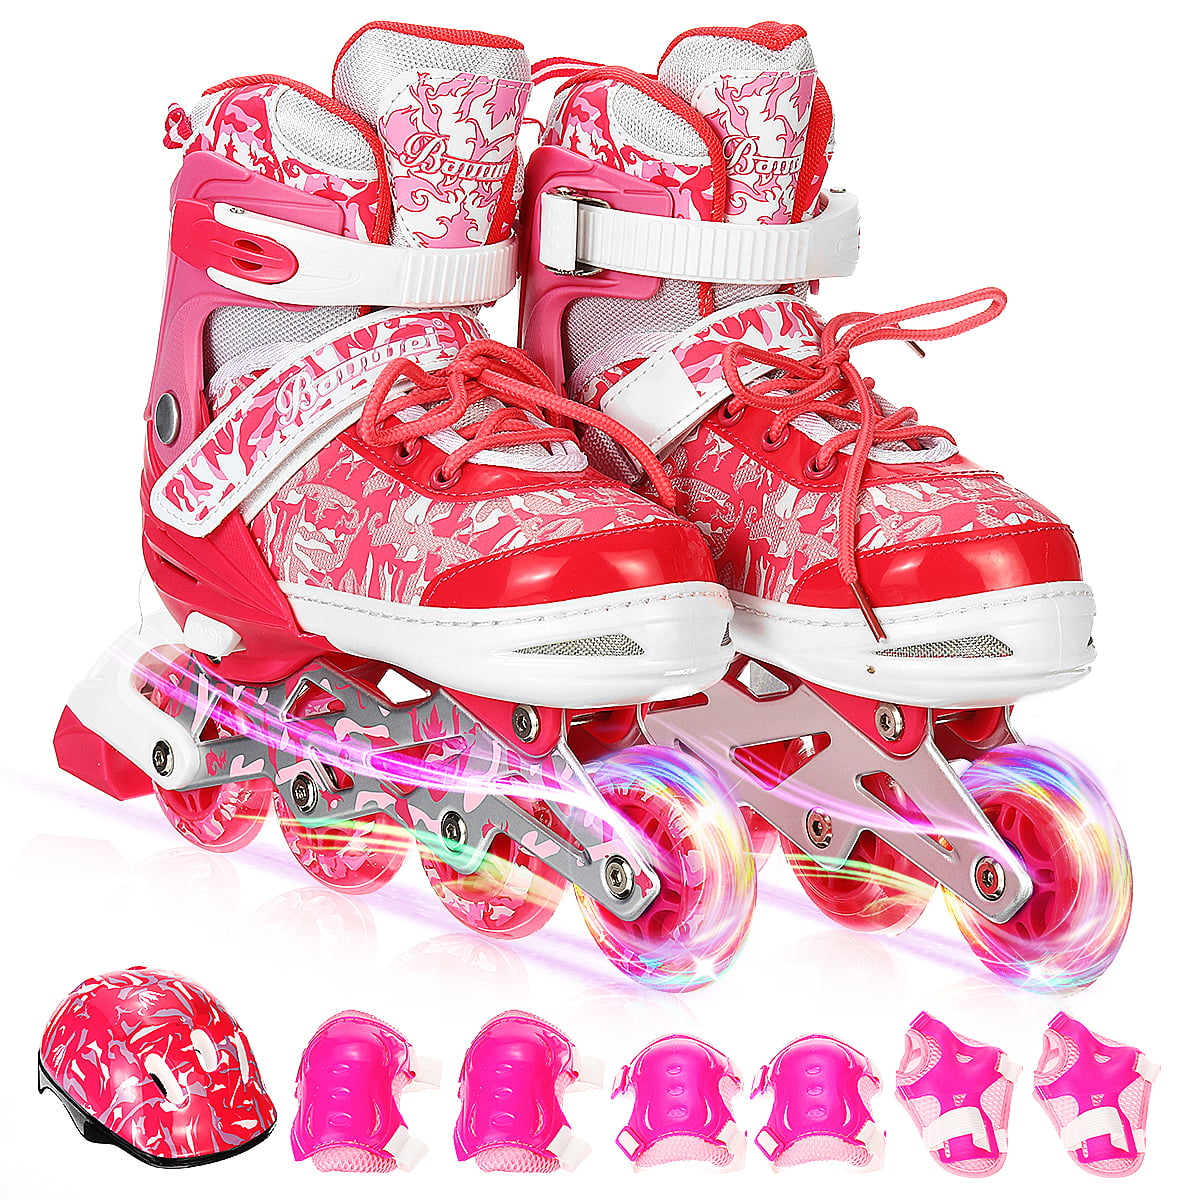 Liberty Imports Grow-with-Me Easy Training Adjustable Inline Rollerskates 